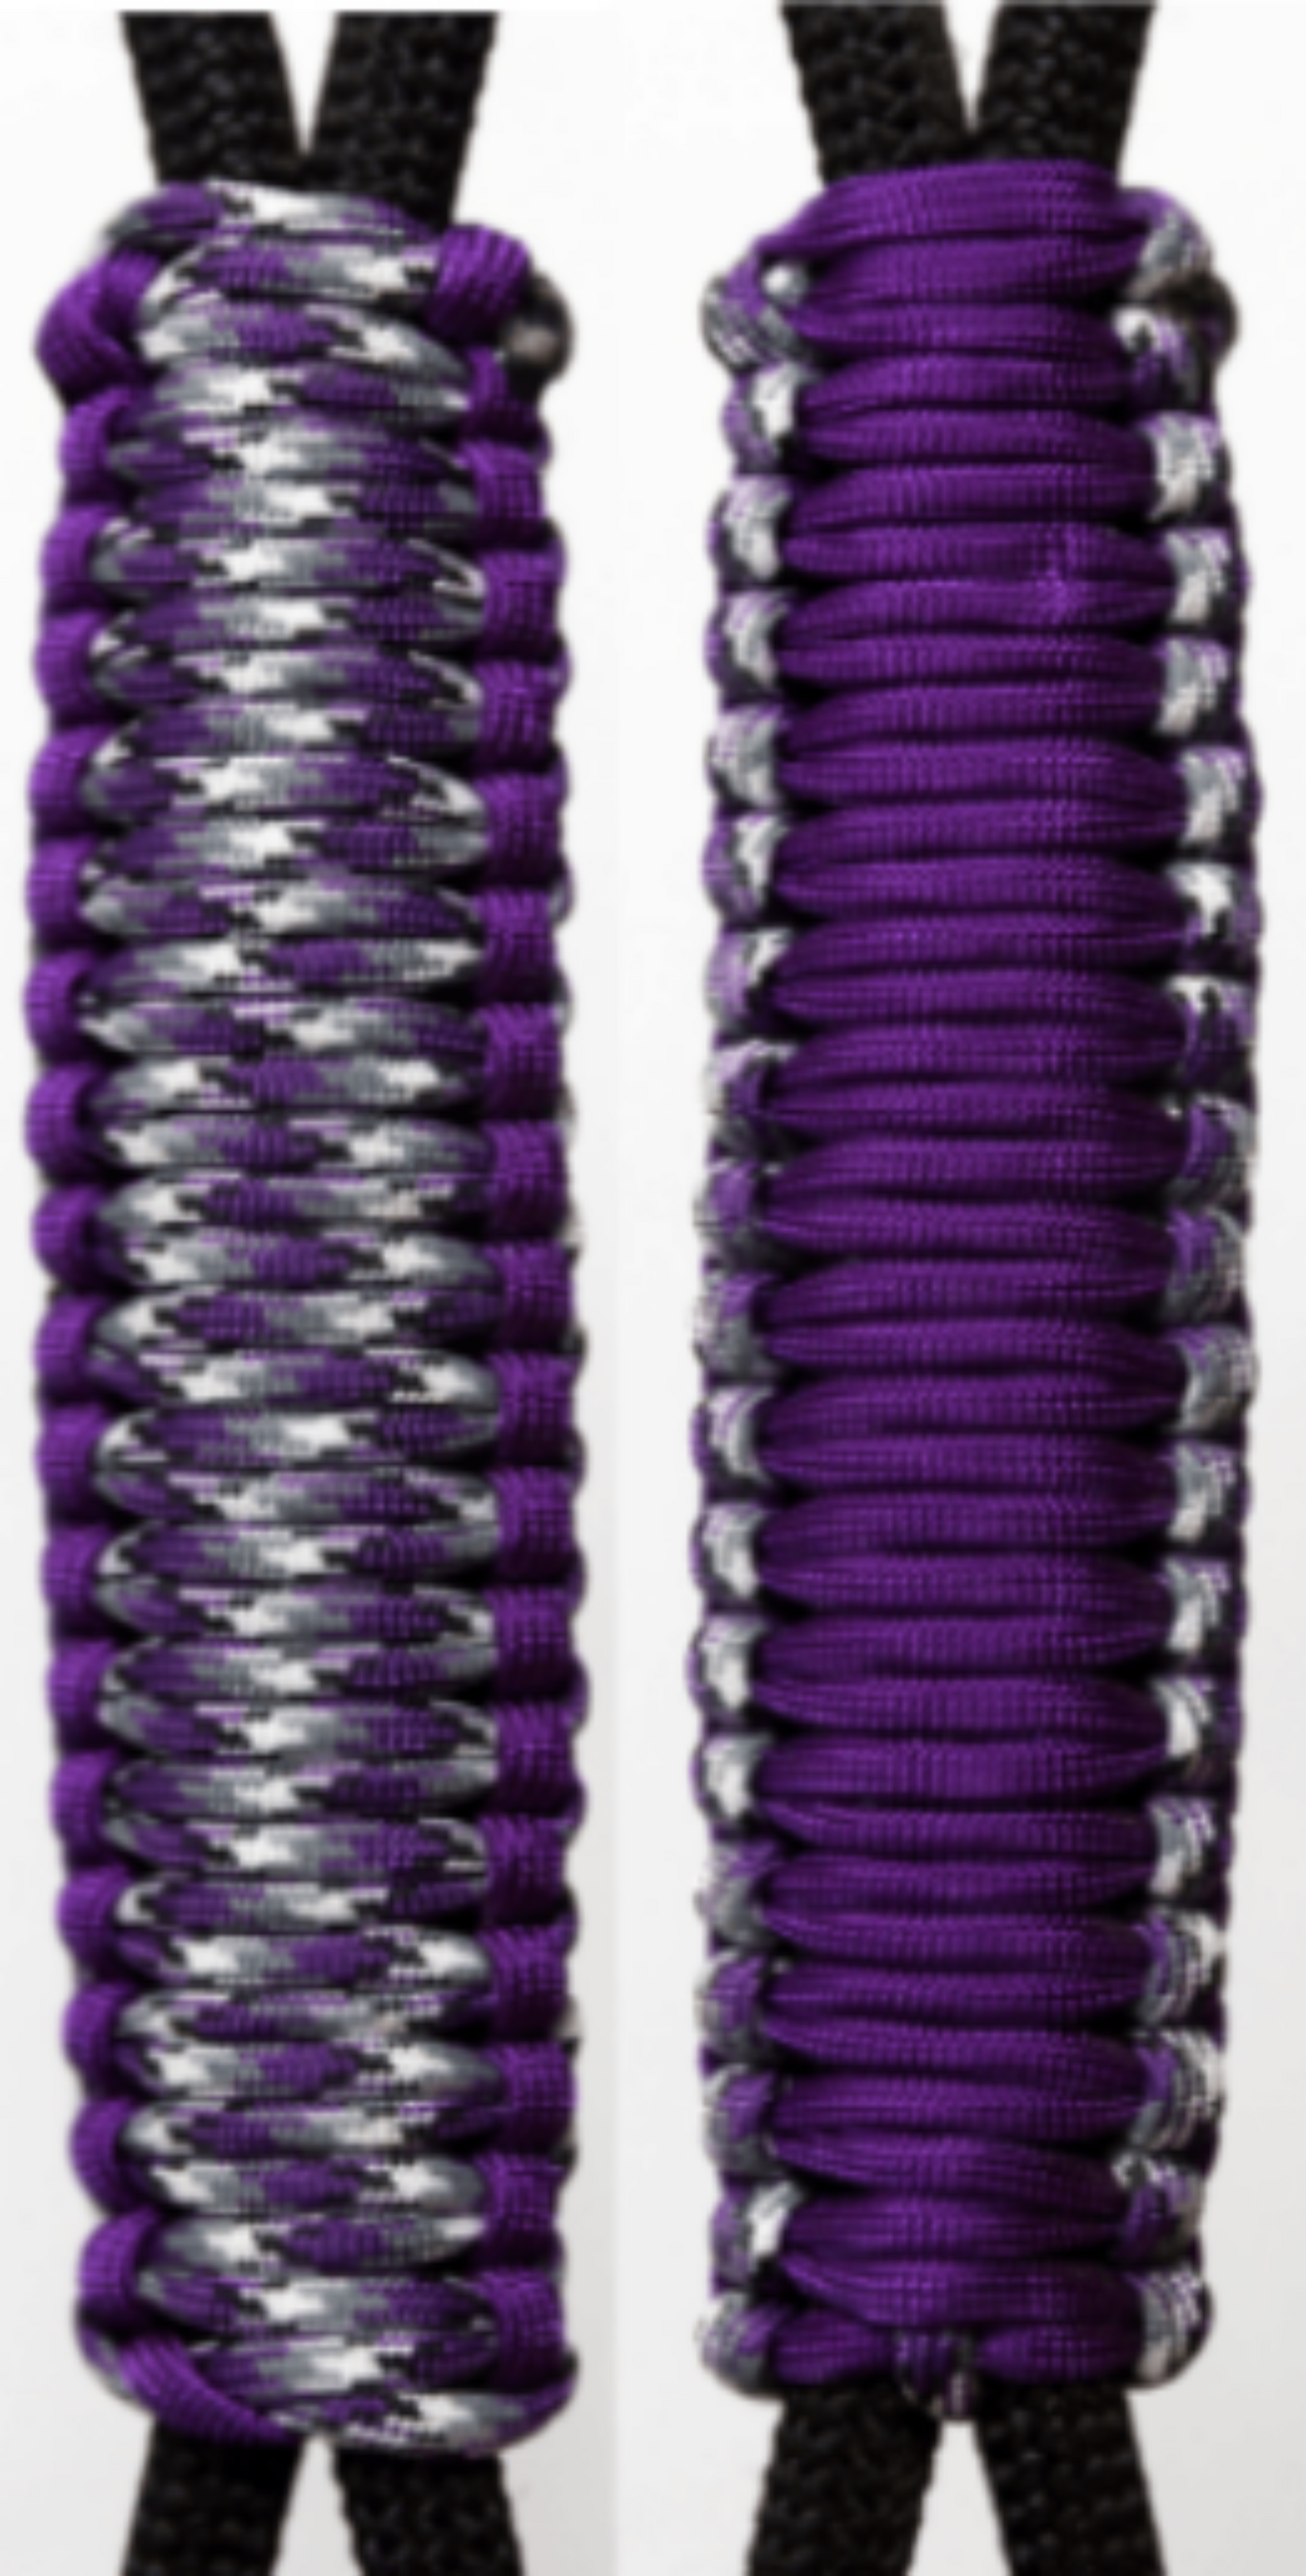 Paracord Handmade Handles for Stainless Steel Tumblers - Made in USA! –  Reel Fishy Apparel